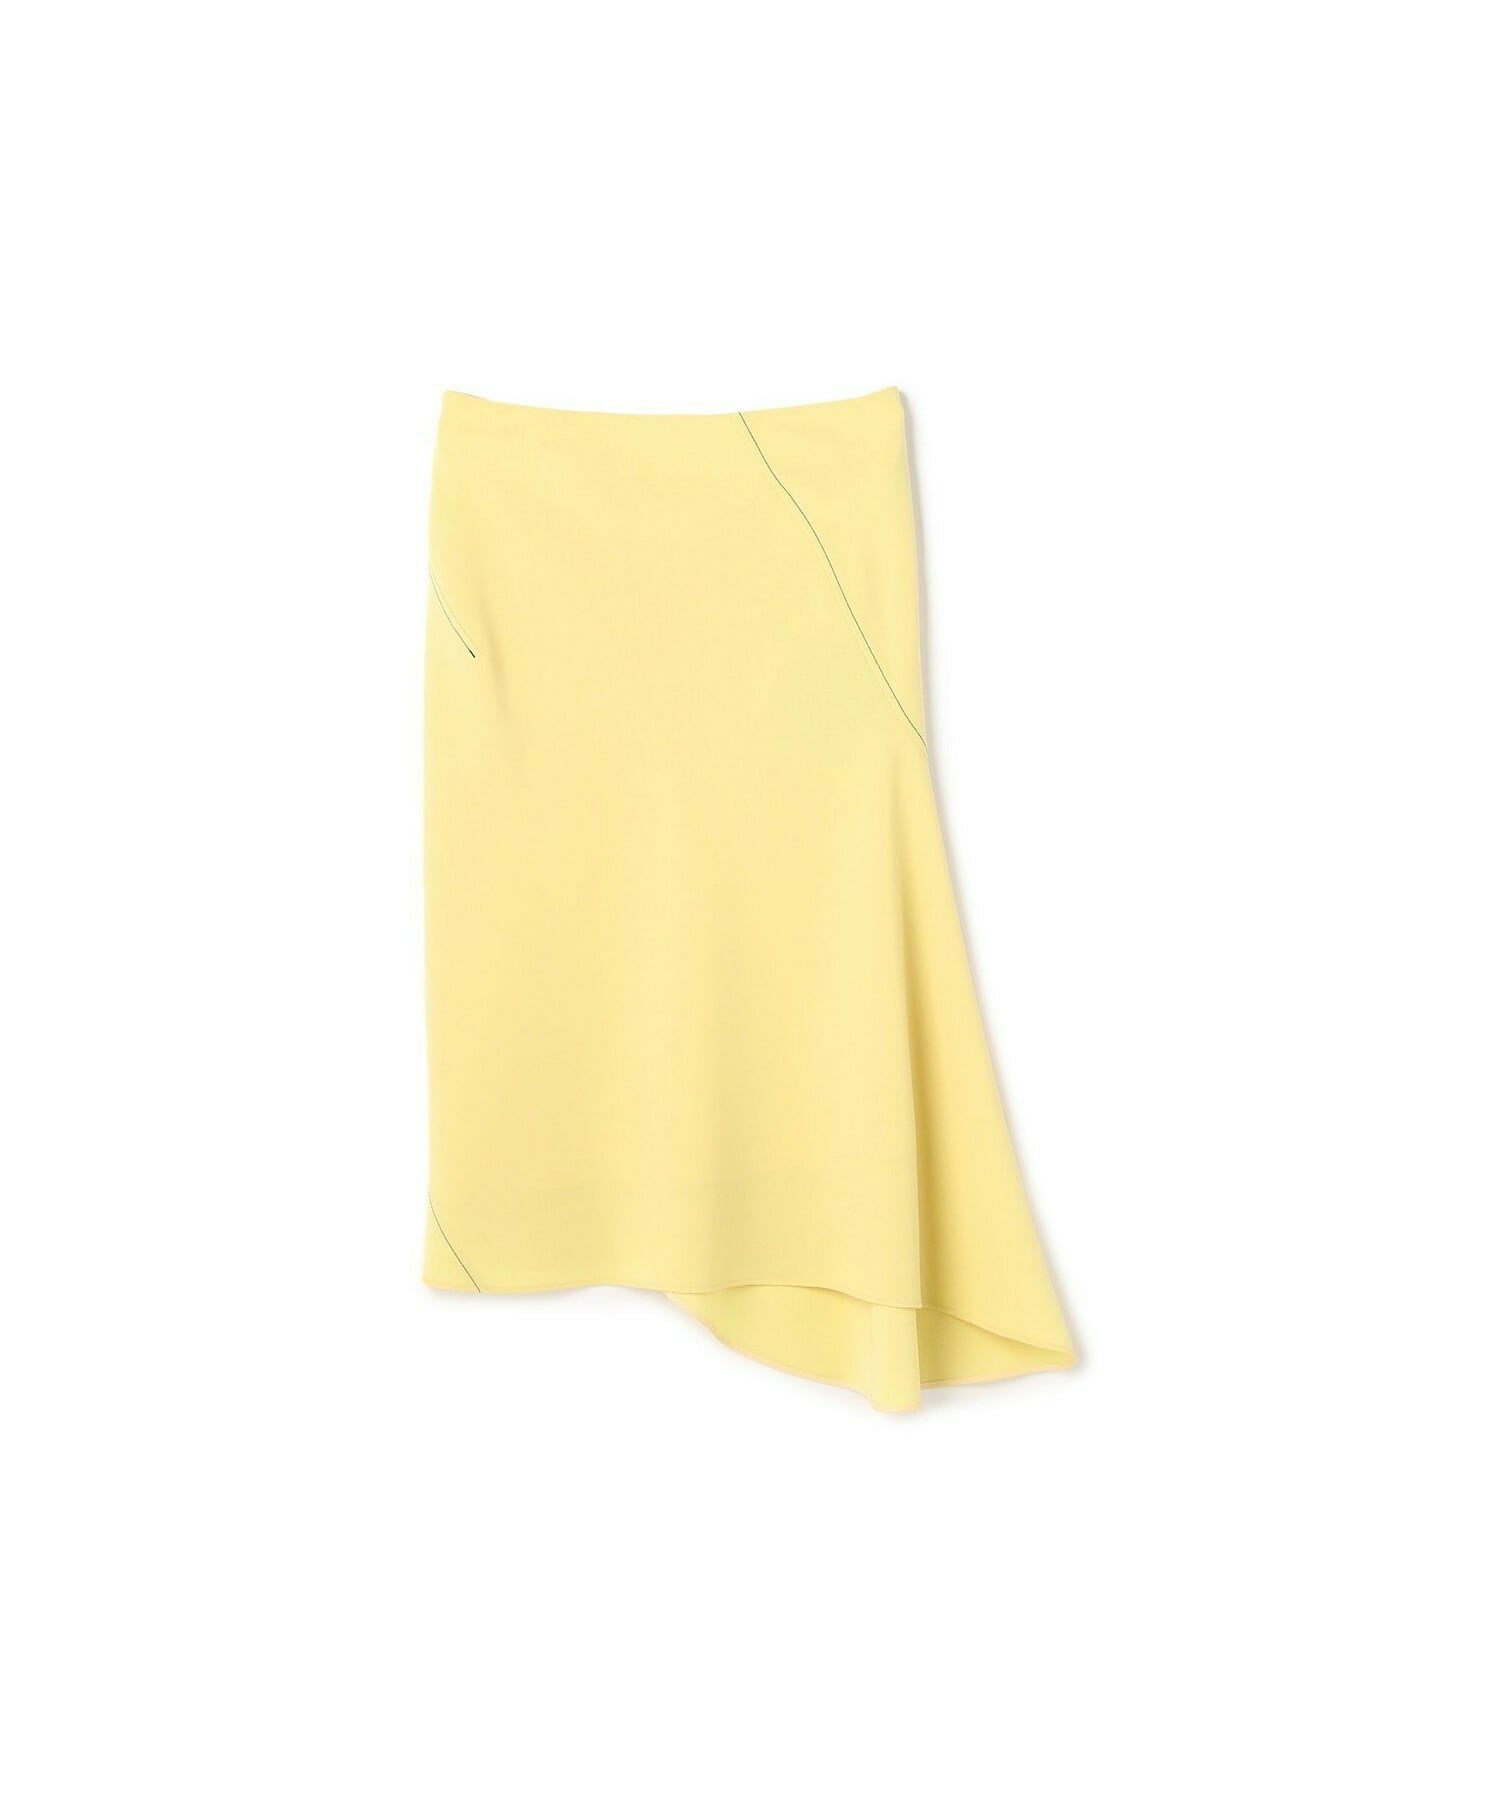 【yoshie inaba】LIGHT DOUBLE CLOTH  “BIAS-CUT” “SPIRAL SEAMED” SKIRT 詳細画像 イエロー 1